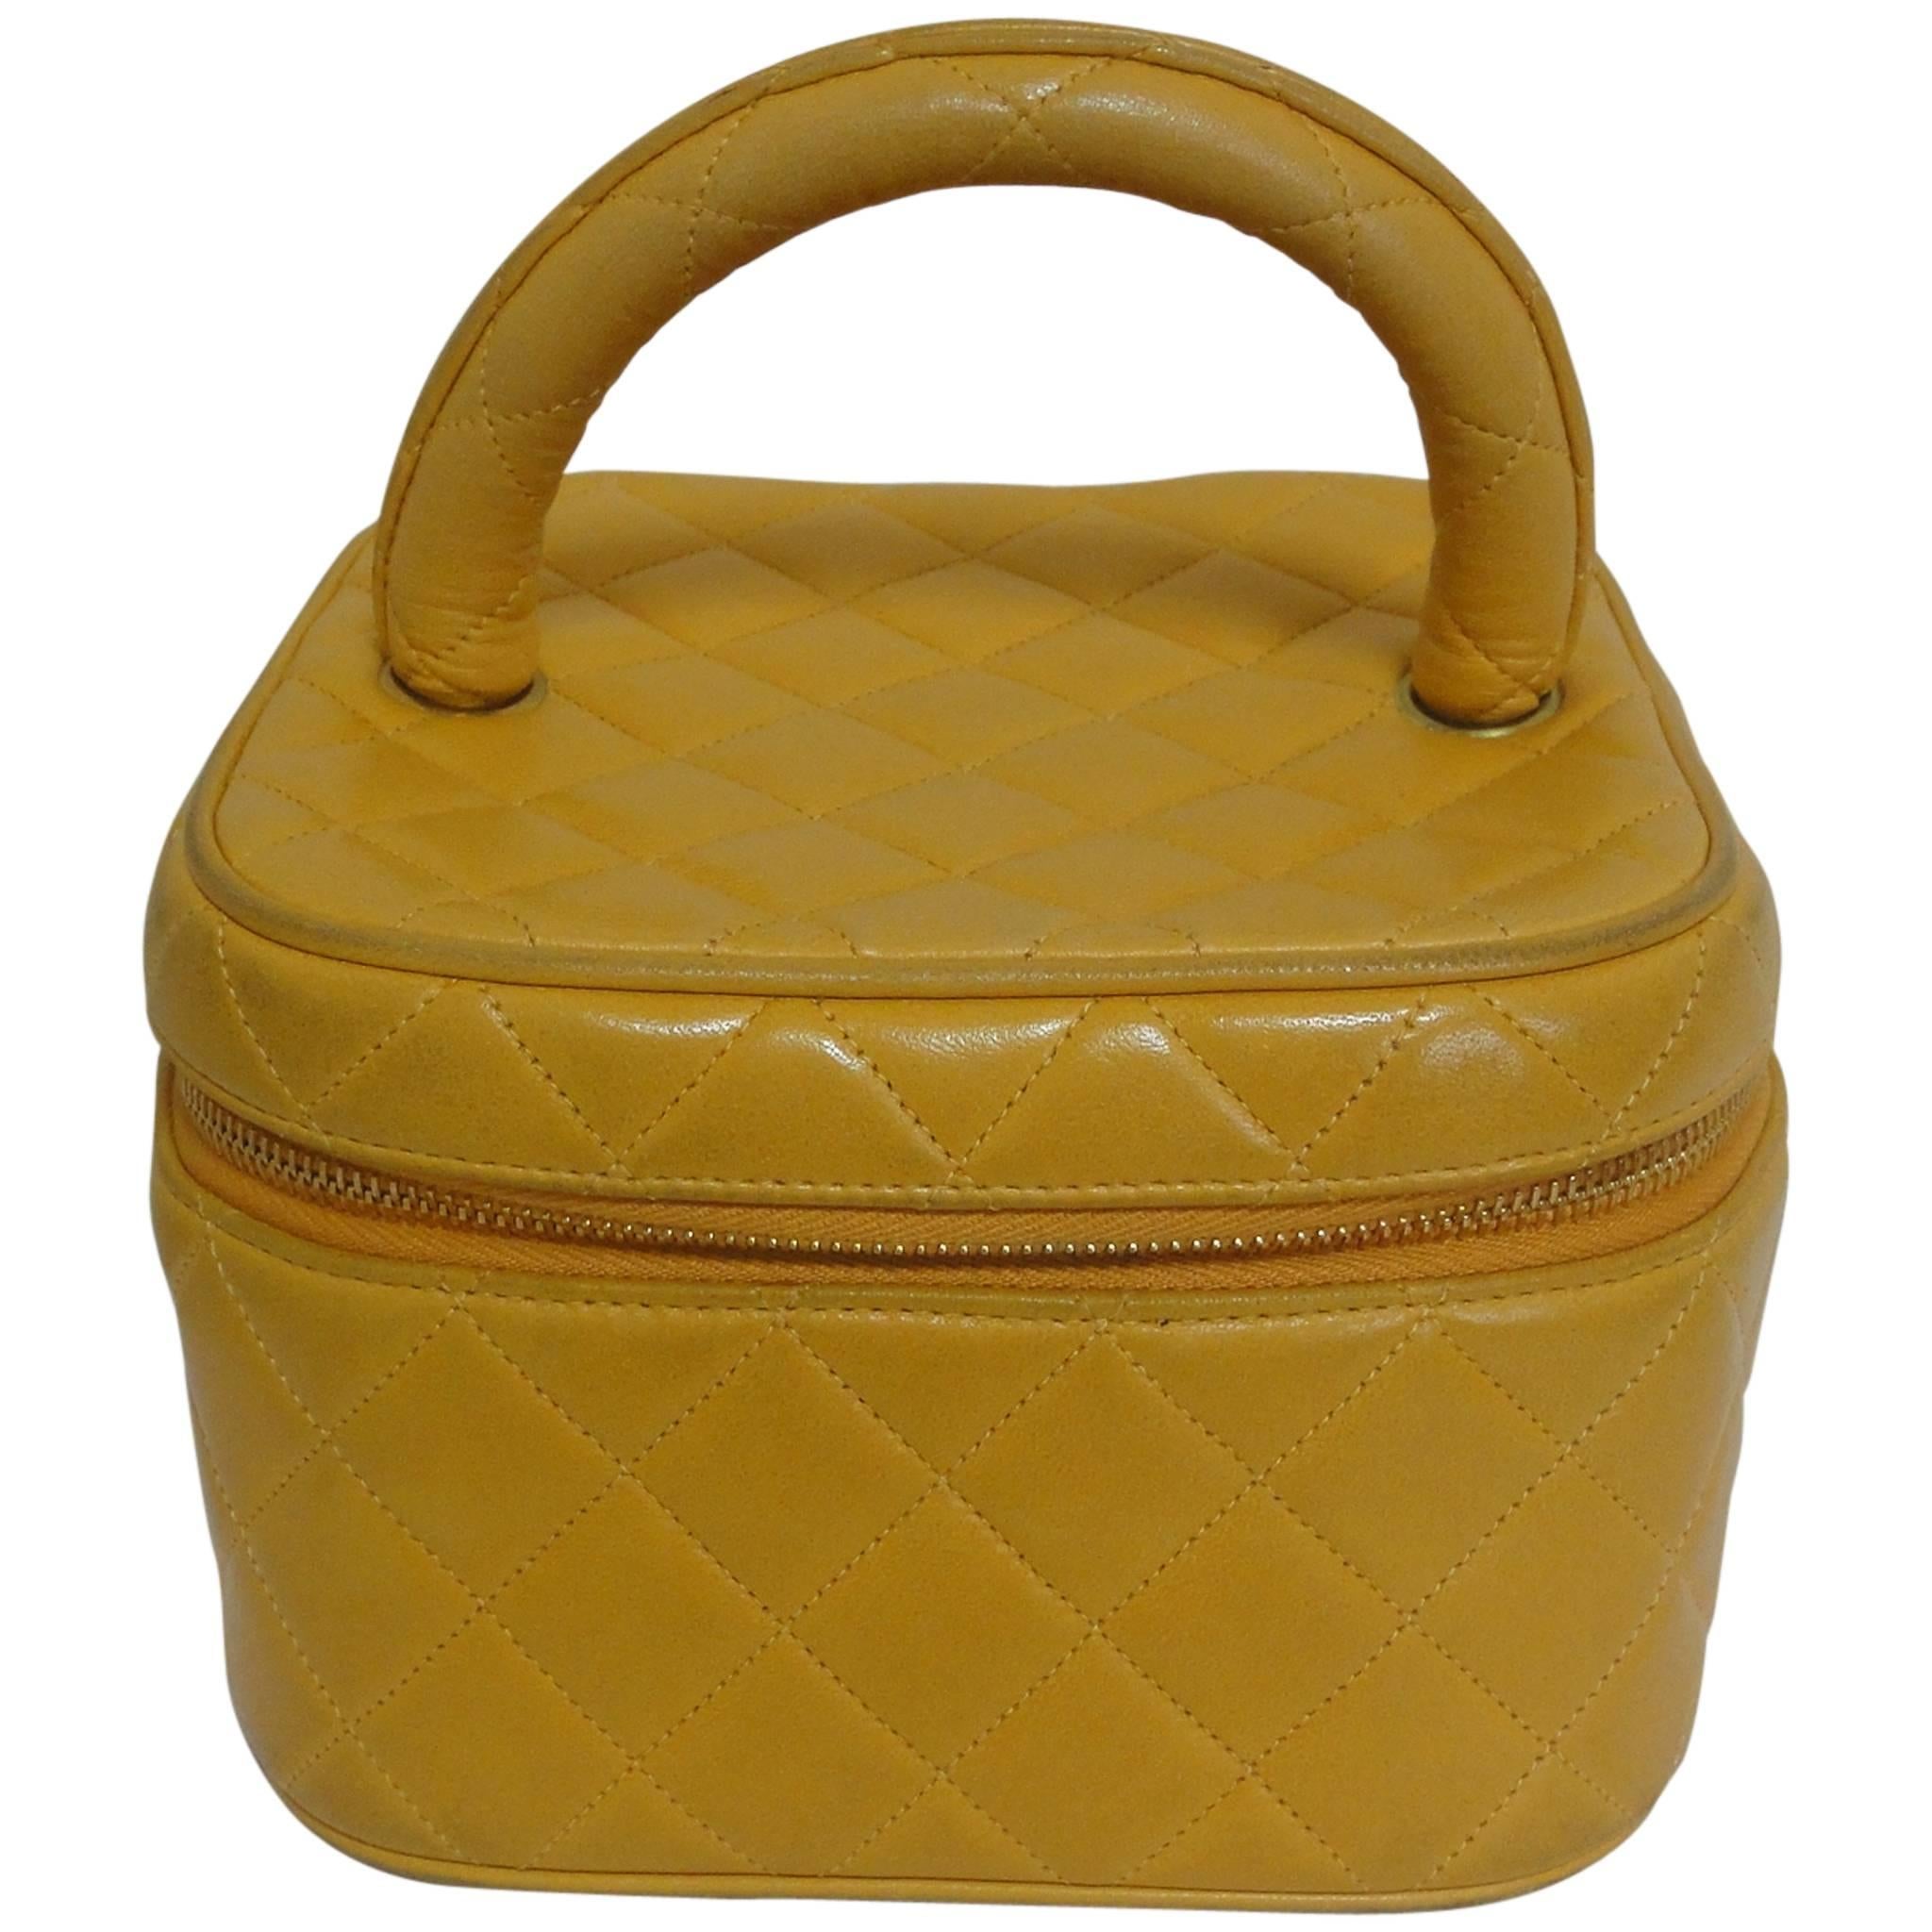 Vintage CHANEL yellow quilted lambskin cosmetic, make up case, mini handbag